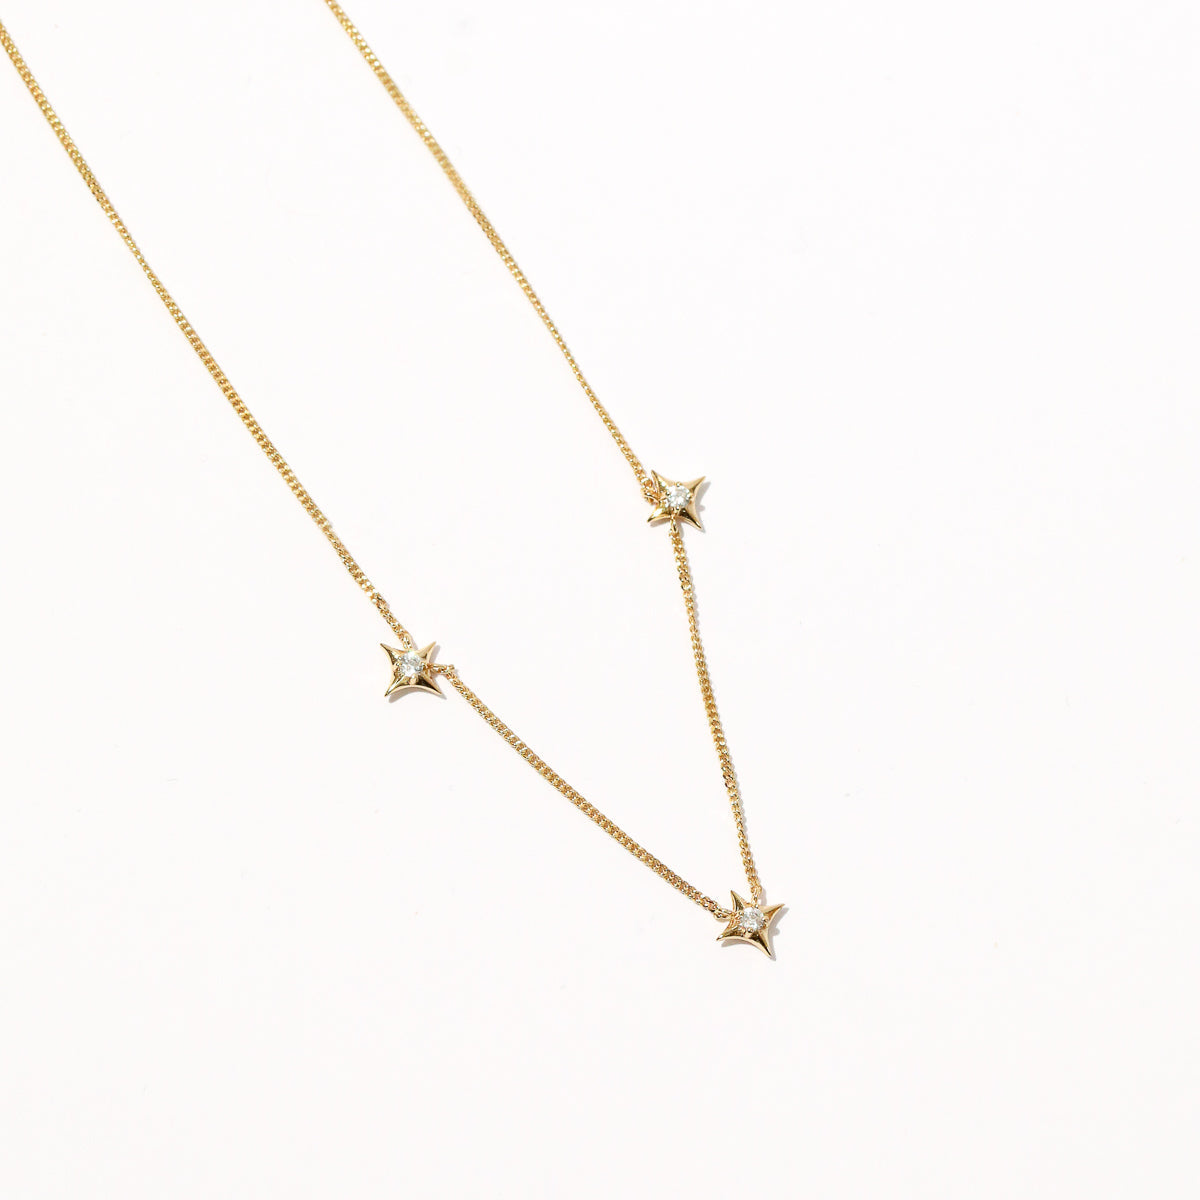 Cosmic Star Charm Necklace in Gold flat lay